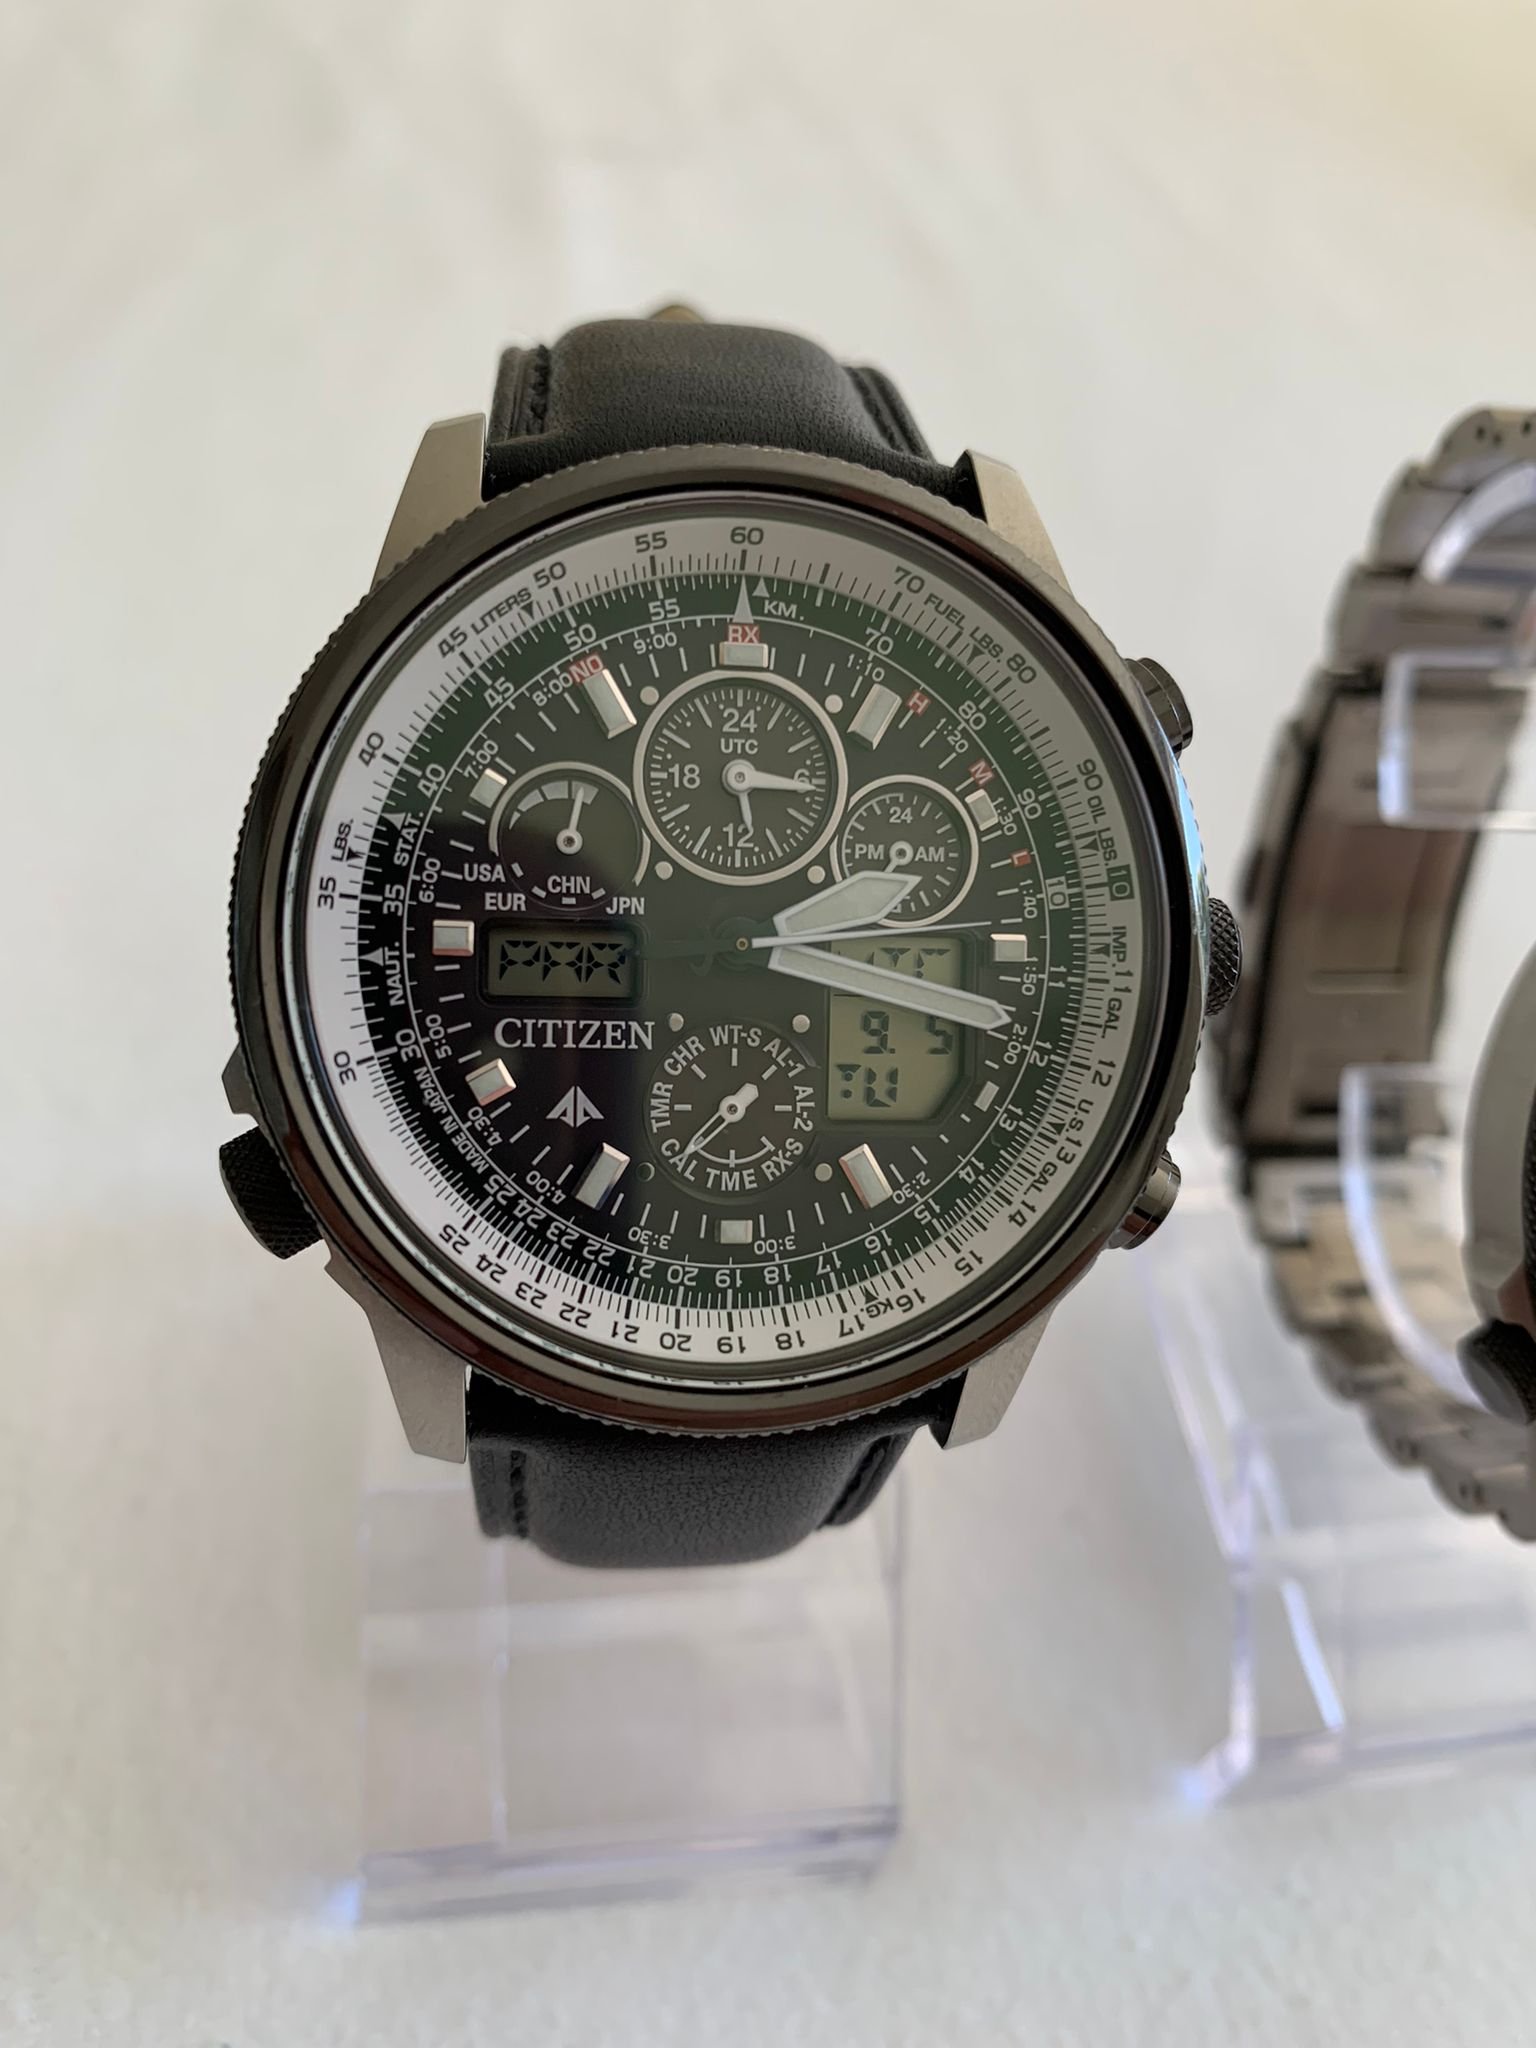 2x Citizen Promaster Sky Pilot PMV65-2272, 1 with strap, 1 with